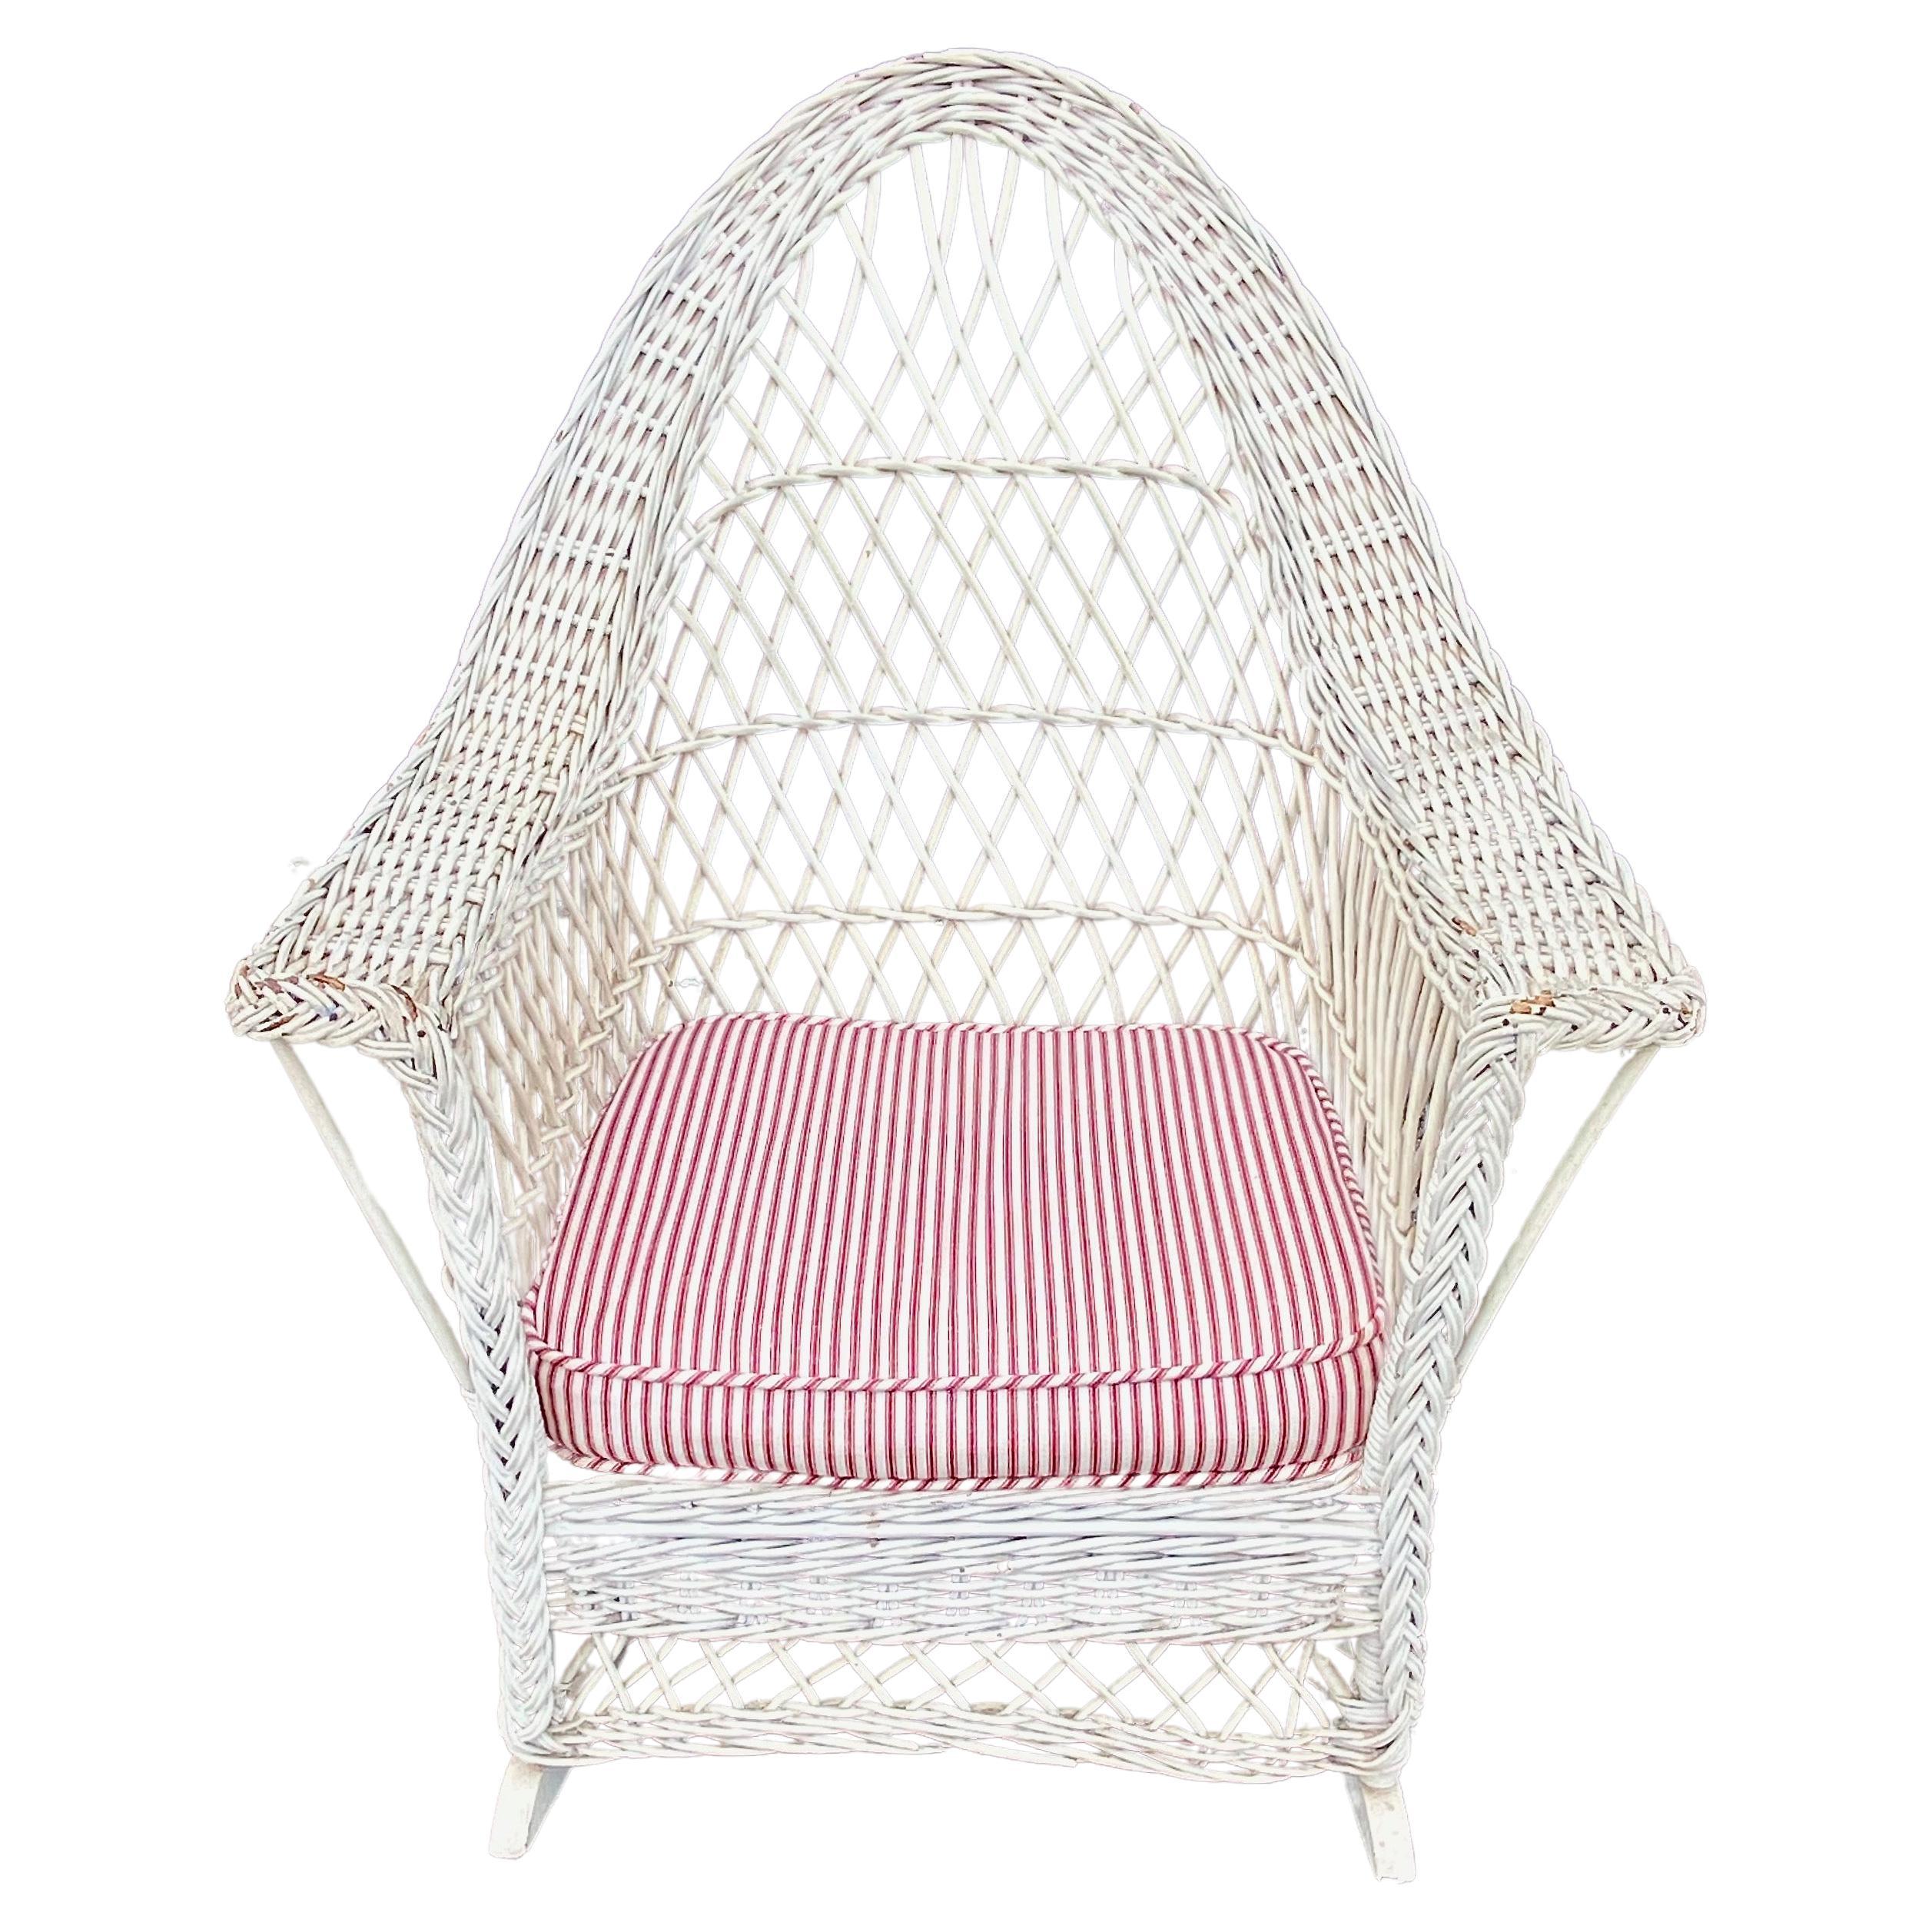 This is an unusual gothic-arched back Bar Harbor-style wicker rocking chair that fully embodies the current Coastal Style design aesthetic. The chair is fresh from a Beverly Hills estate and ready for another few generations of use. The chair is in